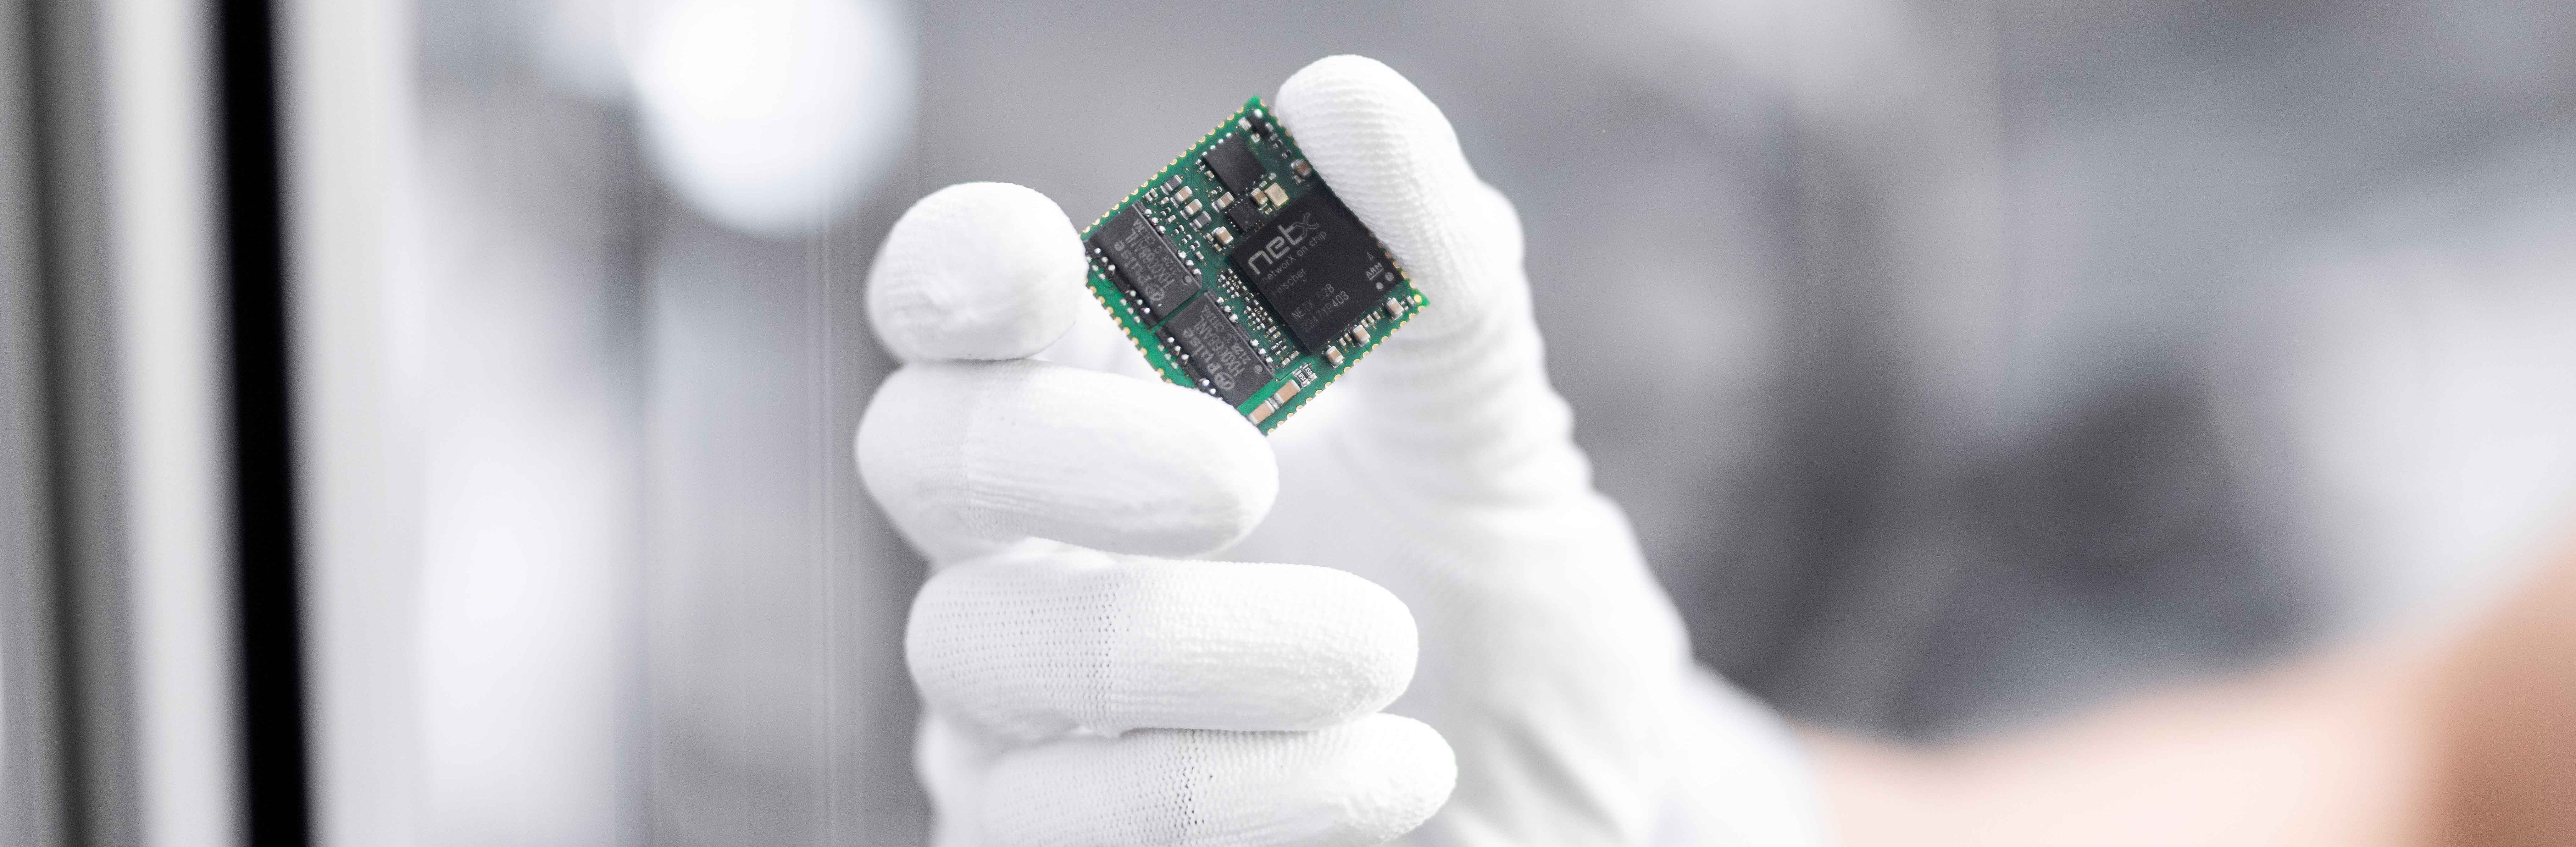 A hand in a white glove holds an embedd module from Hilscher. Mounted on the green square module is a netX 52.